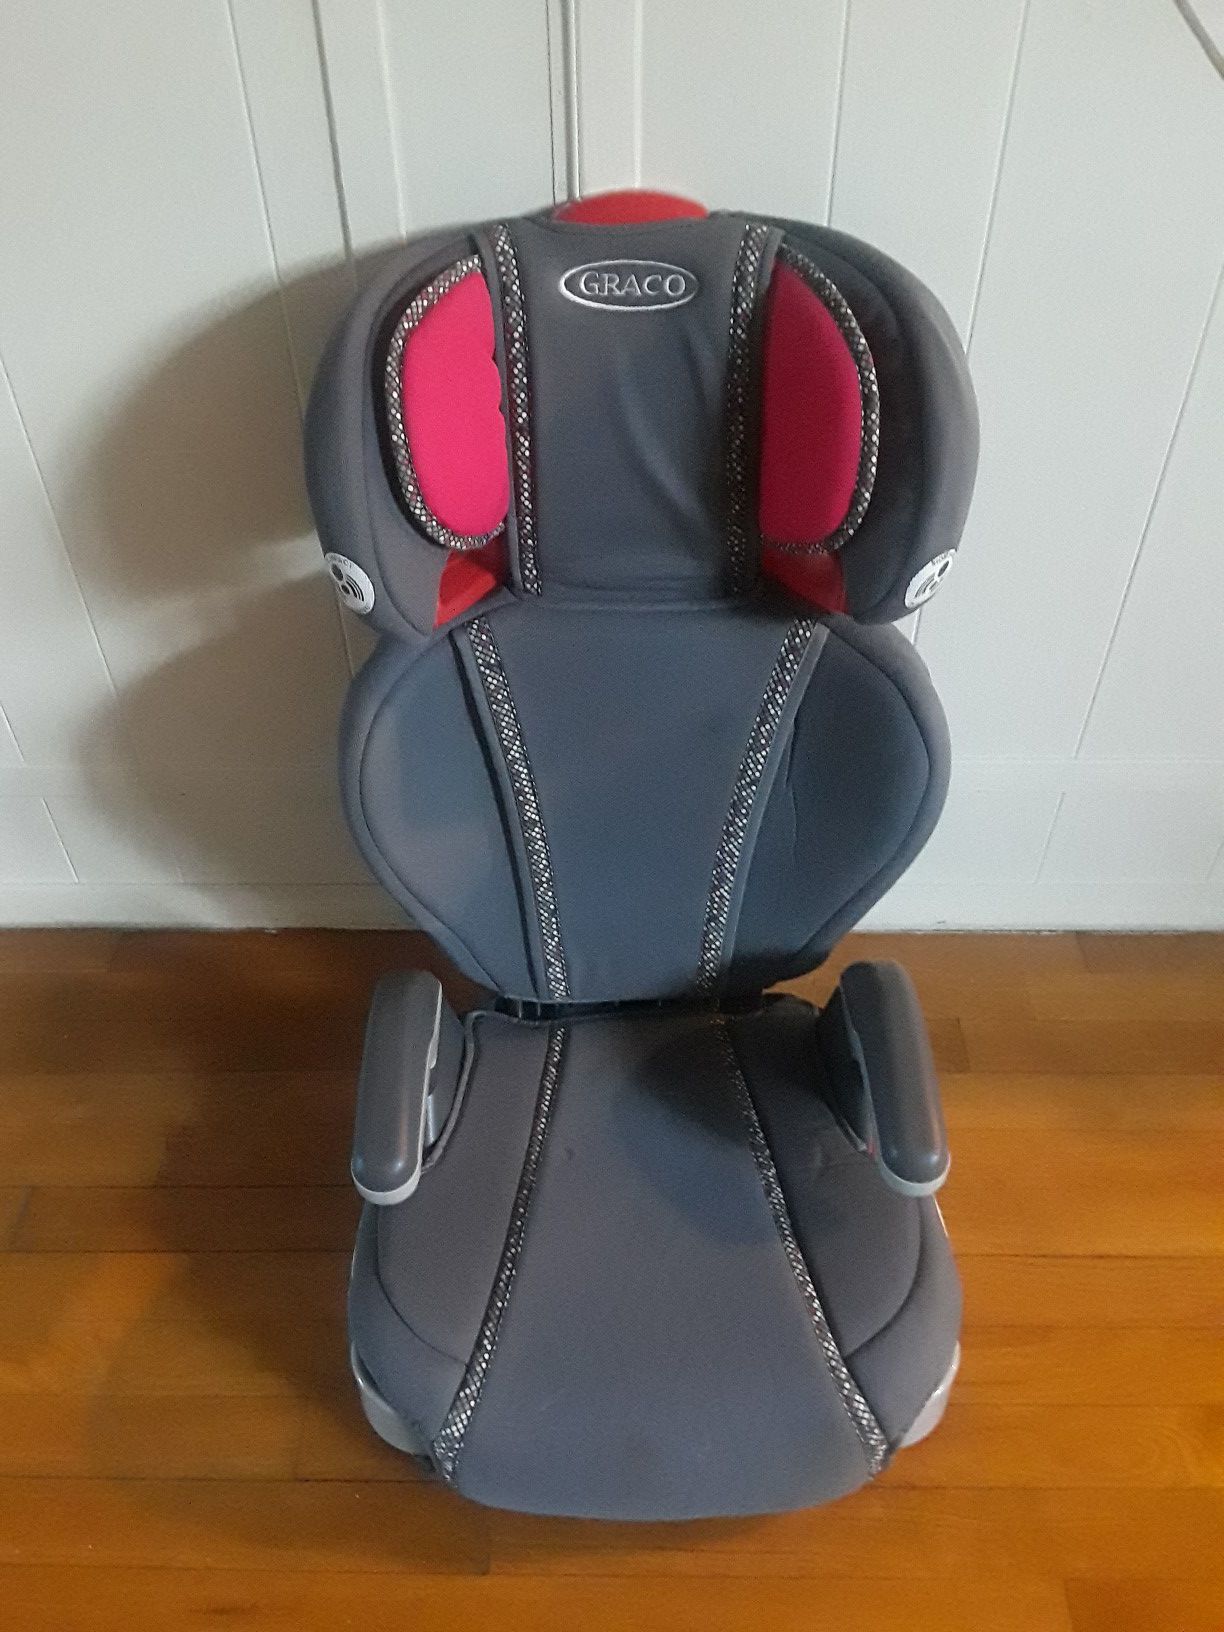 Graco car seat with removable booster seat